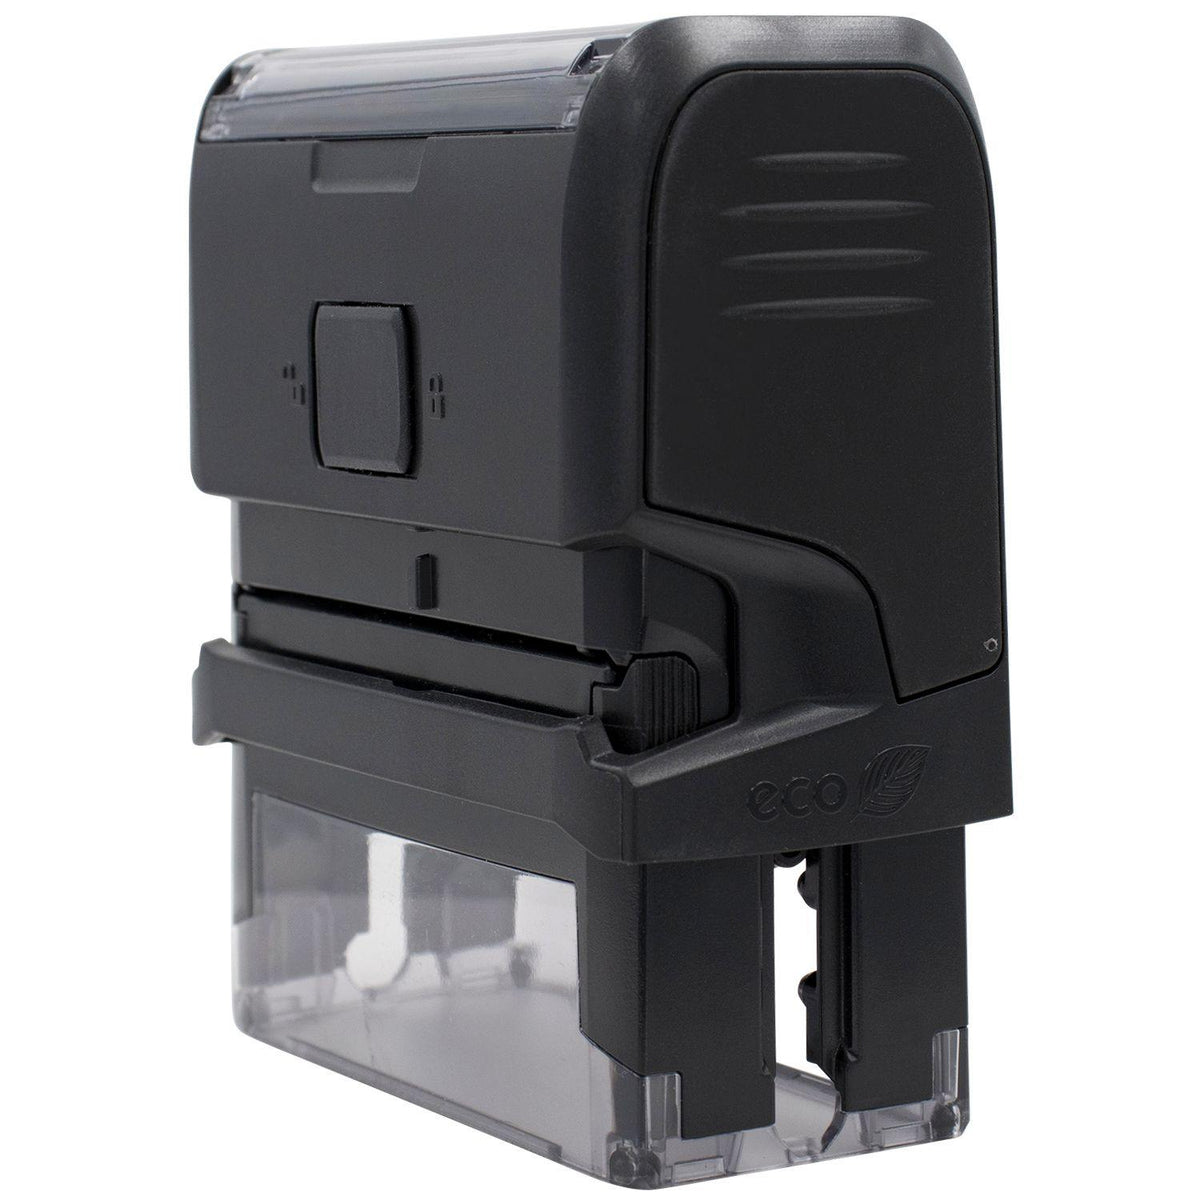 Large Self Inking Damages Stamp - Engineer Seal Stamps - Brand_Trodat, Impression Size_Large, Stamp Type_Self-Inking Stamp, Type of Use_Postal &amp; Mailing, Type of Use_Shipping &amp; Receiving